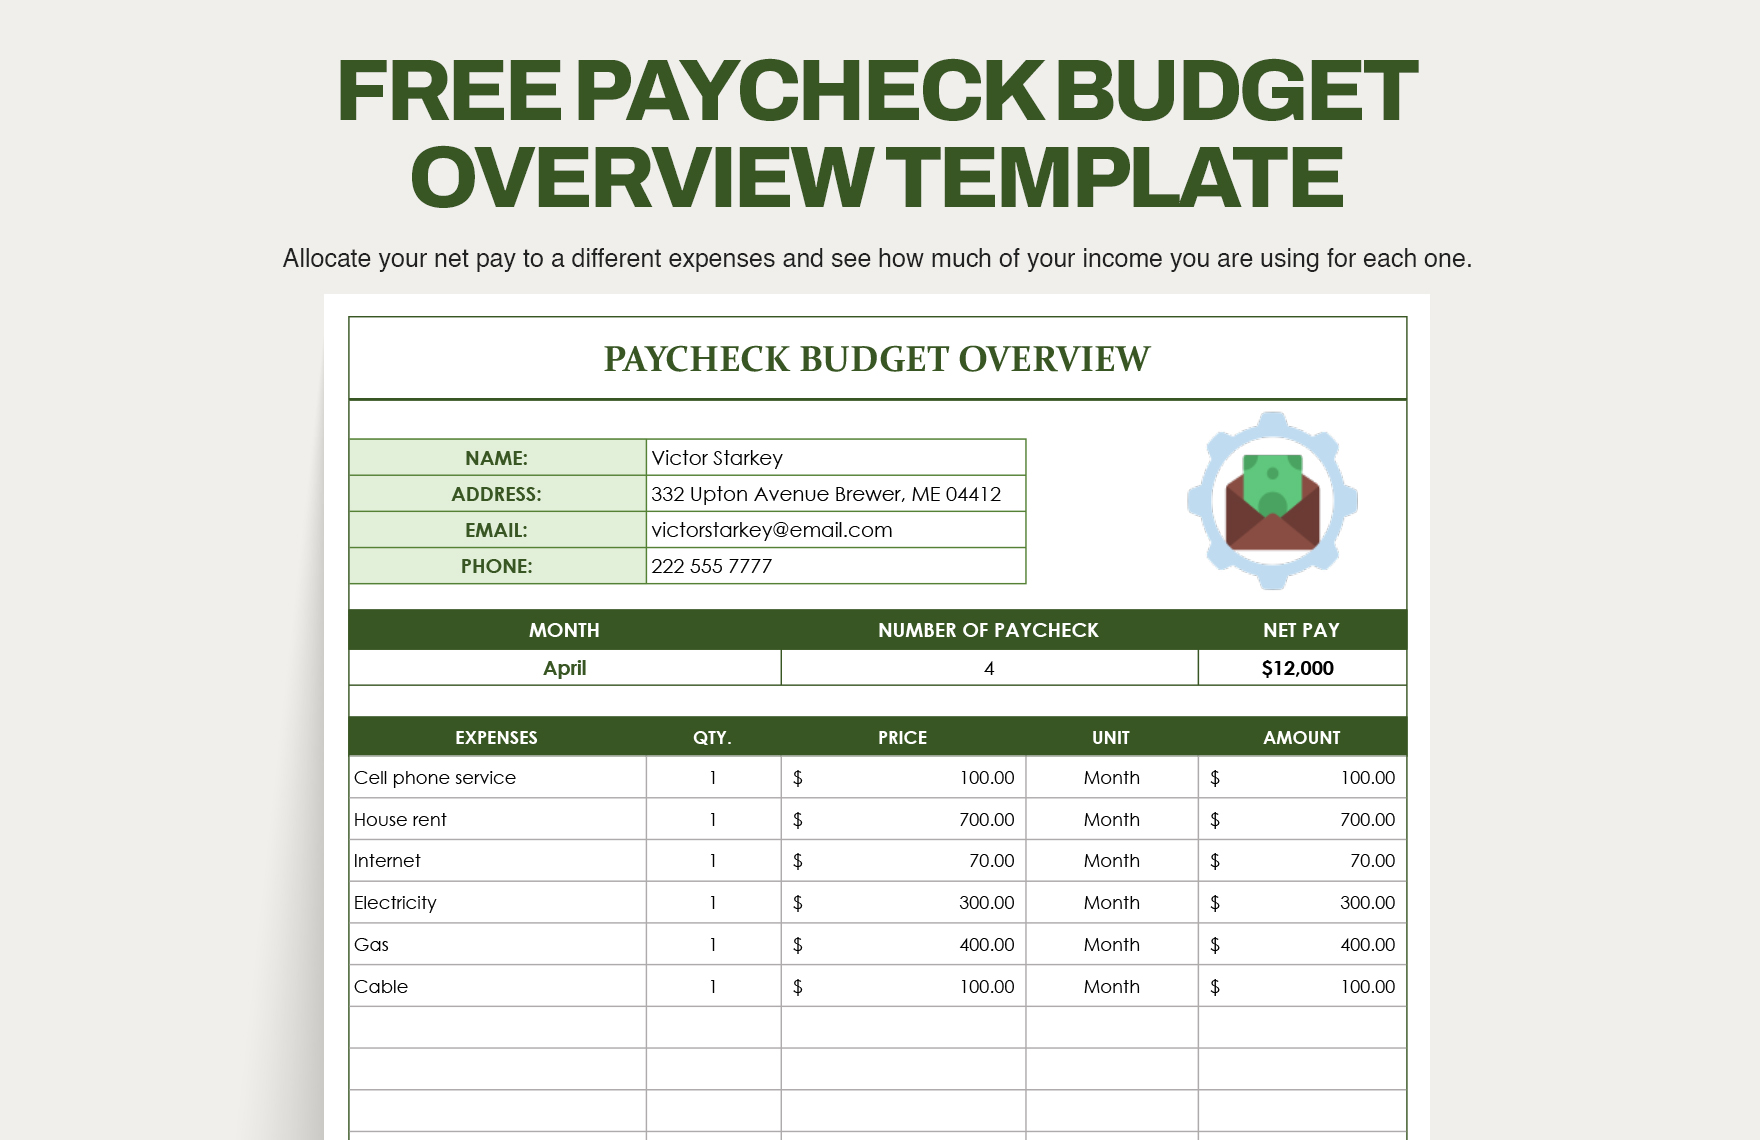 Free Paycheck Budget Overview Template